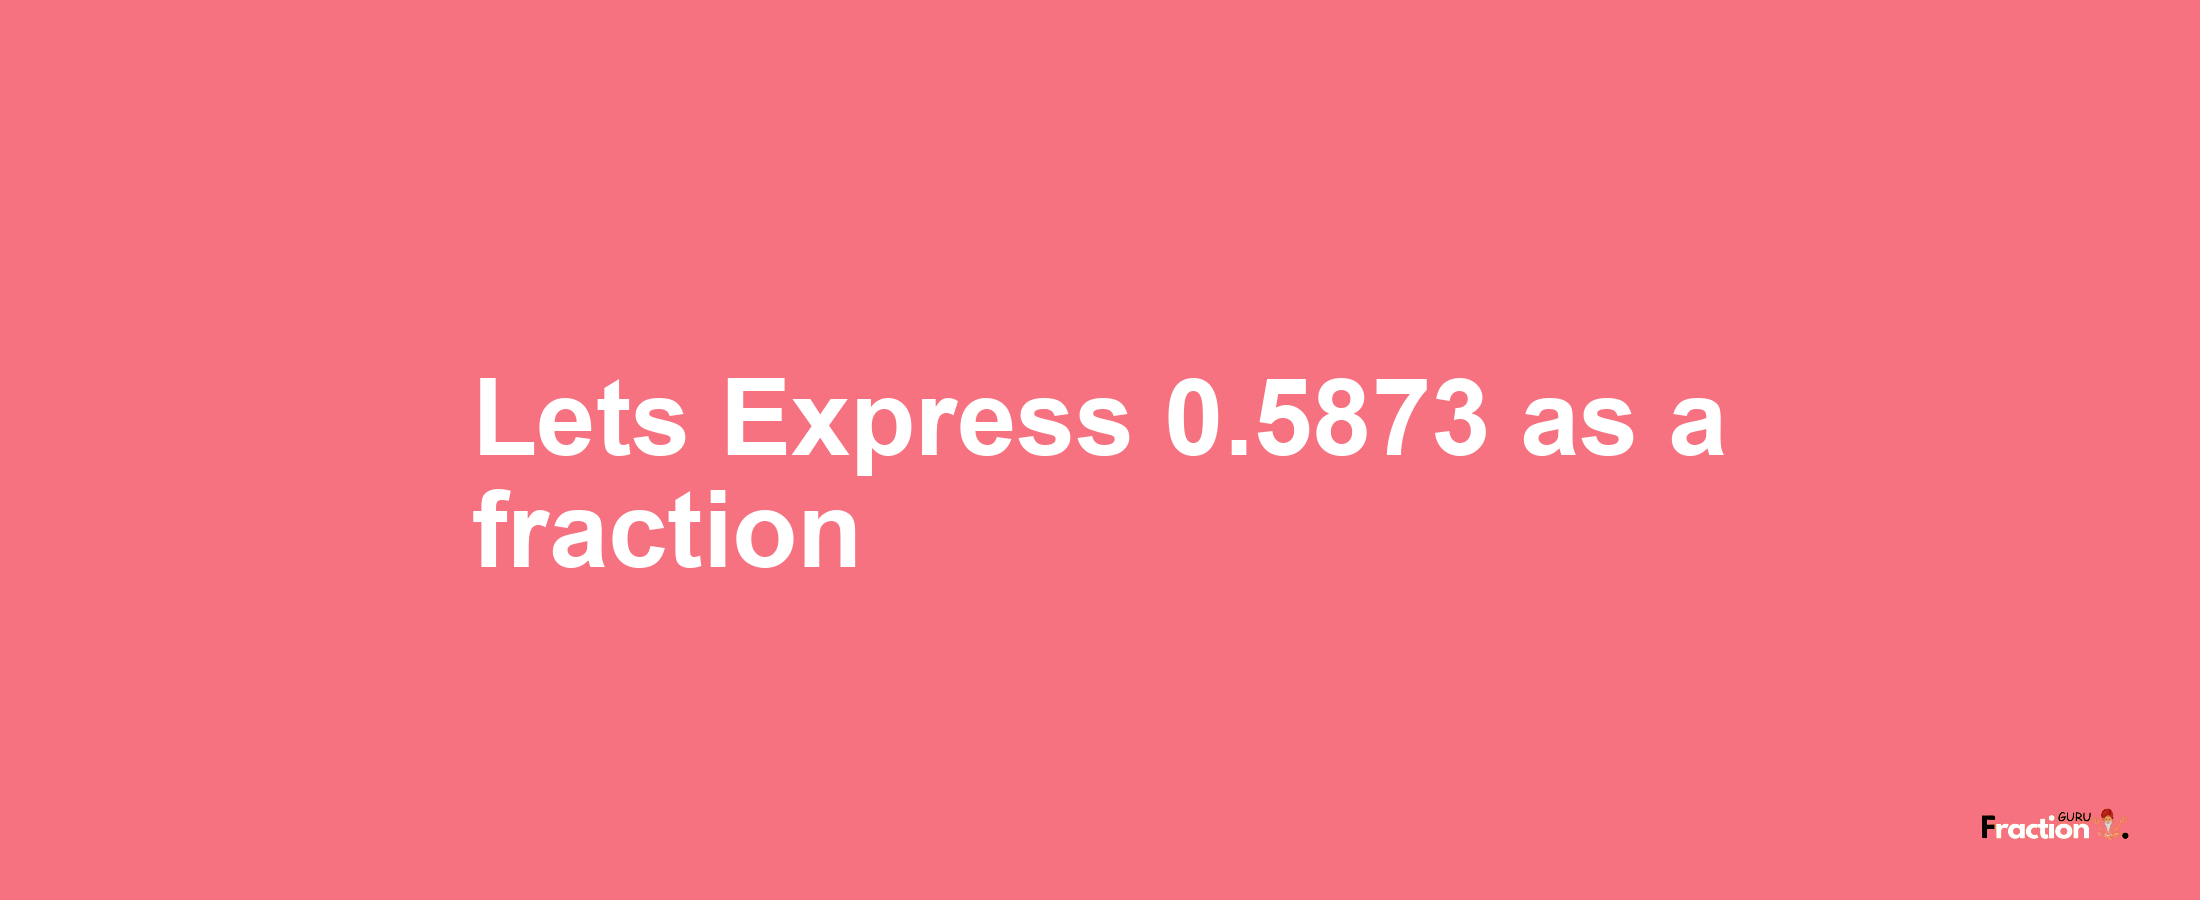 Lets Express 0.5873 as afraction